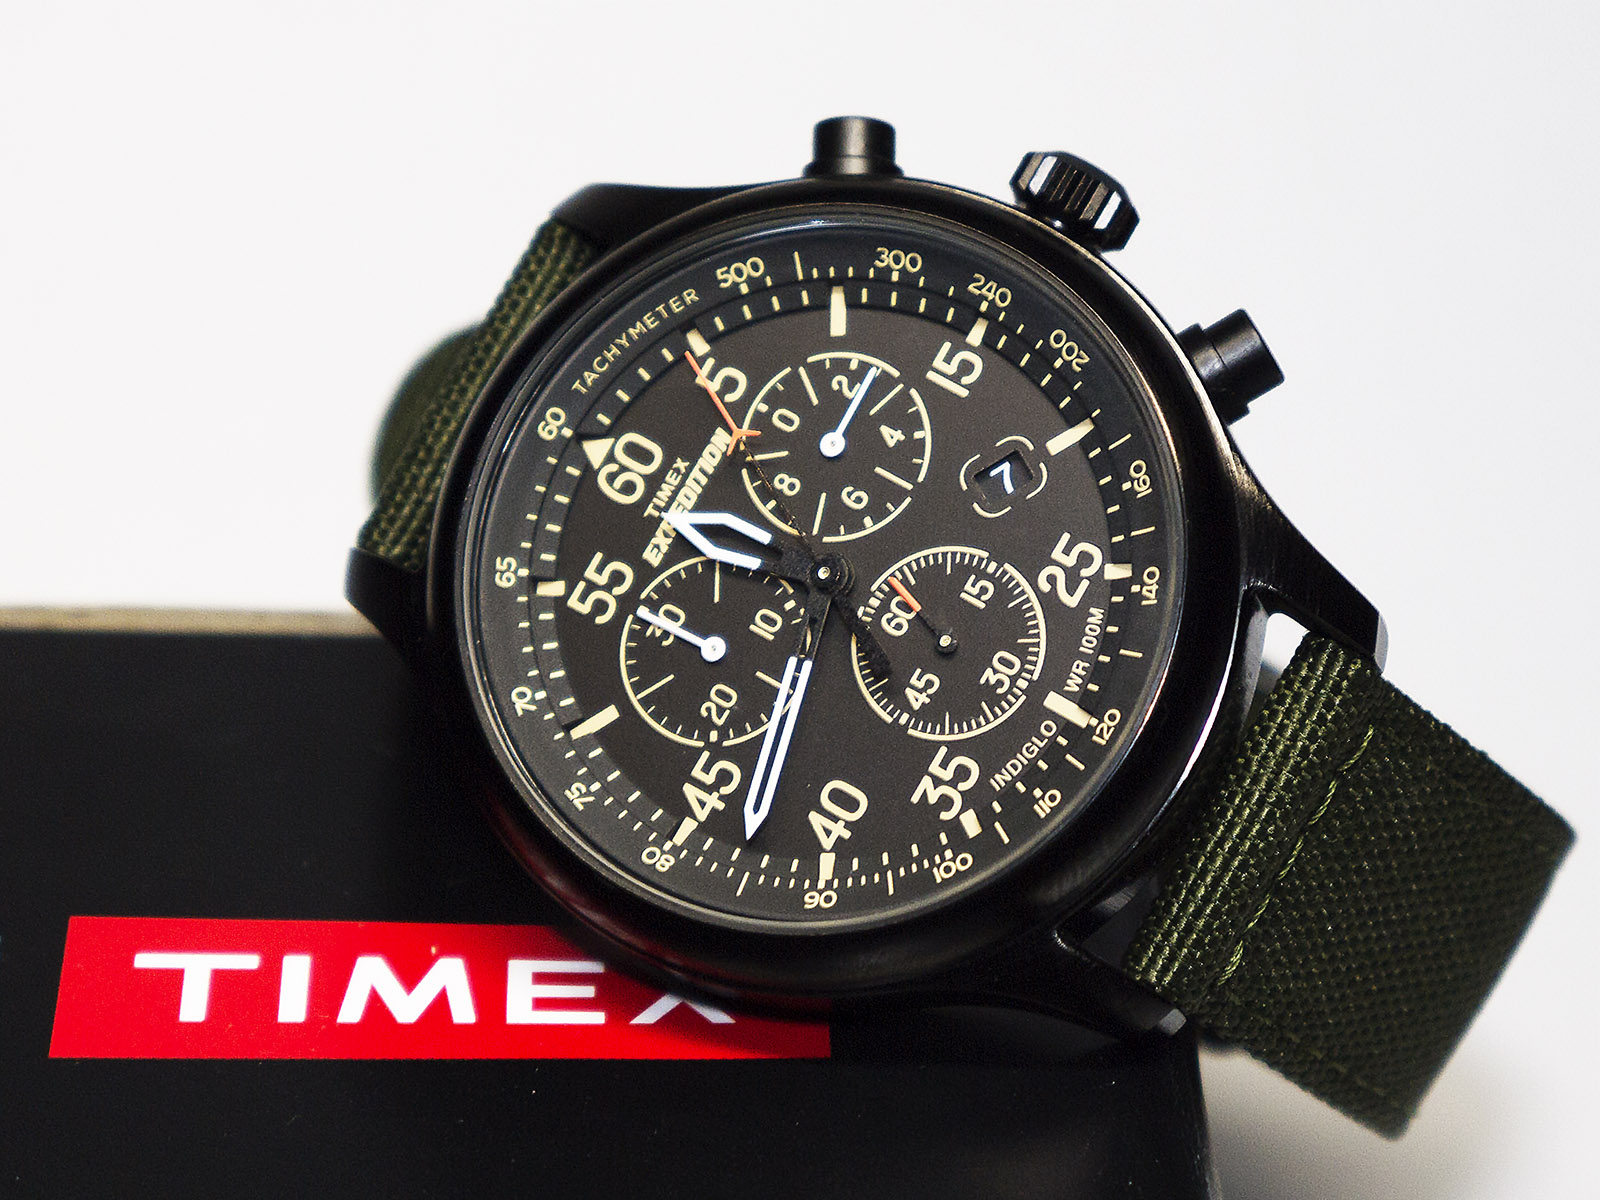 Timex Men's Expedition Field Chronograph